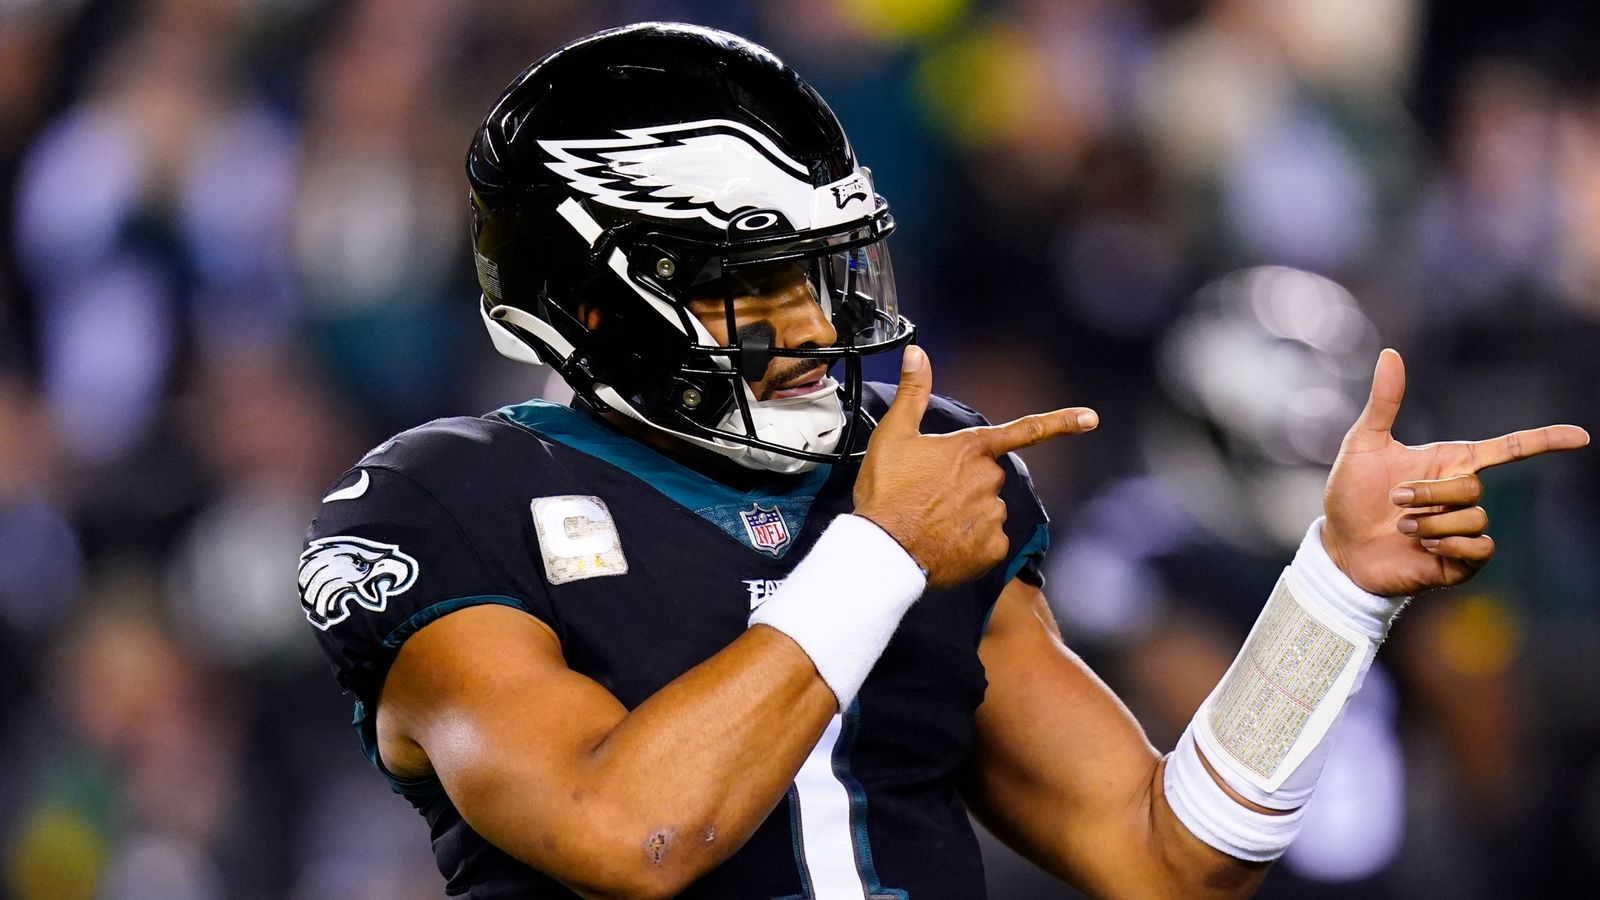 Green Bay Packers 33-40 Philadelphia Eagles: Jalen Hurts breaks Michael Vick’s rushing record to lift Eagles past Packers |  NFL News